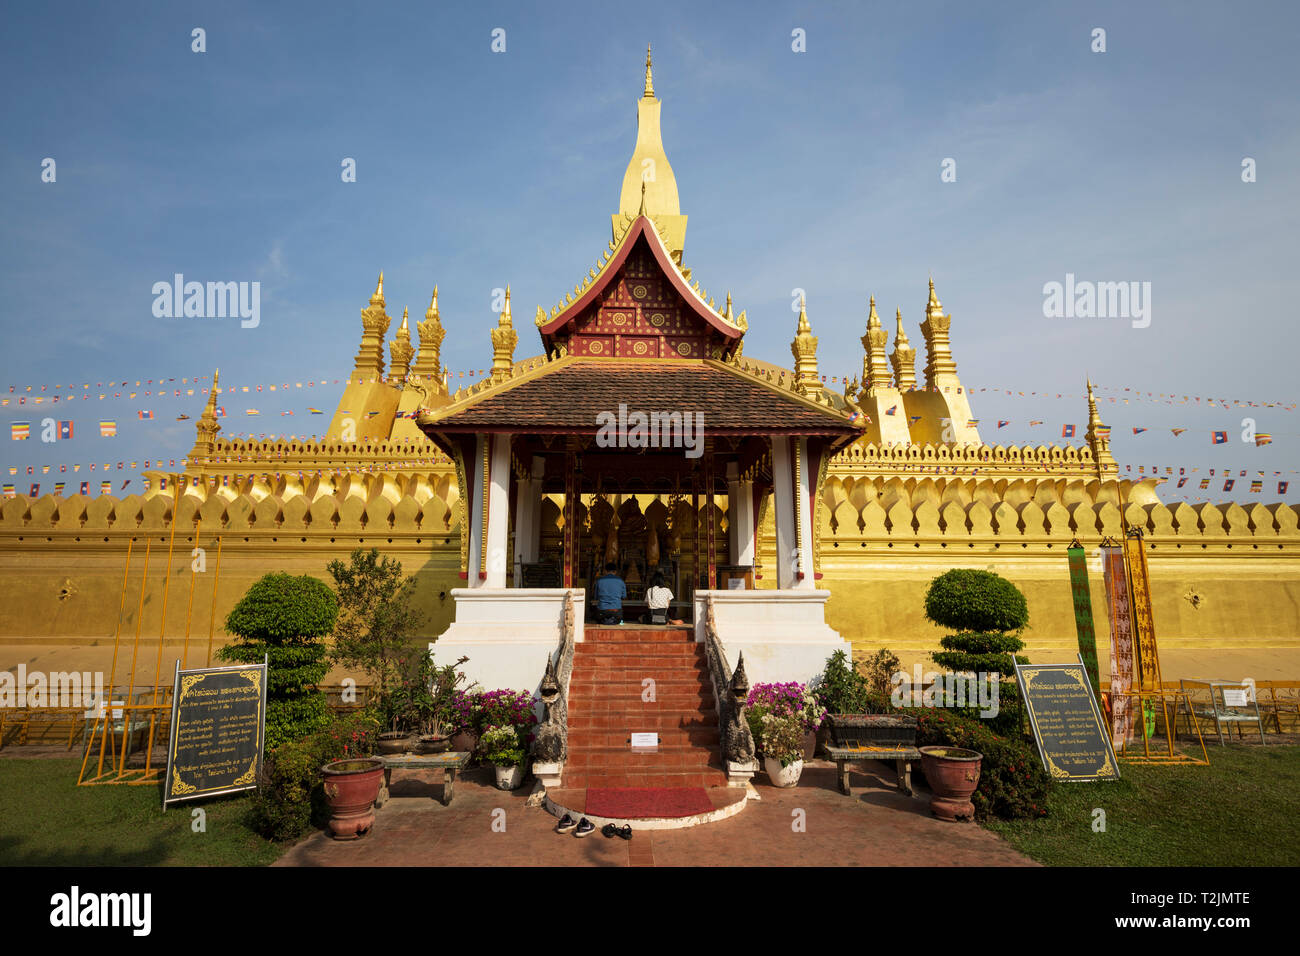 The golden Buddhist stupa of Pha That Luang, Vientiane, Laos, Southeast Asia Stock Photo